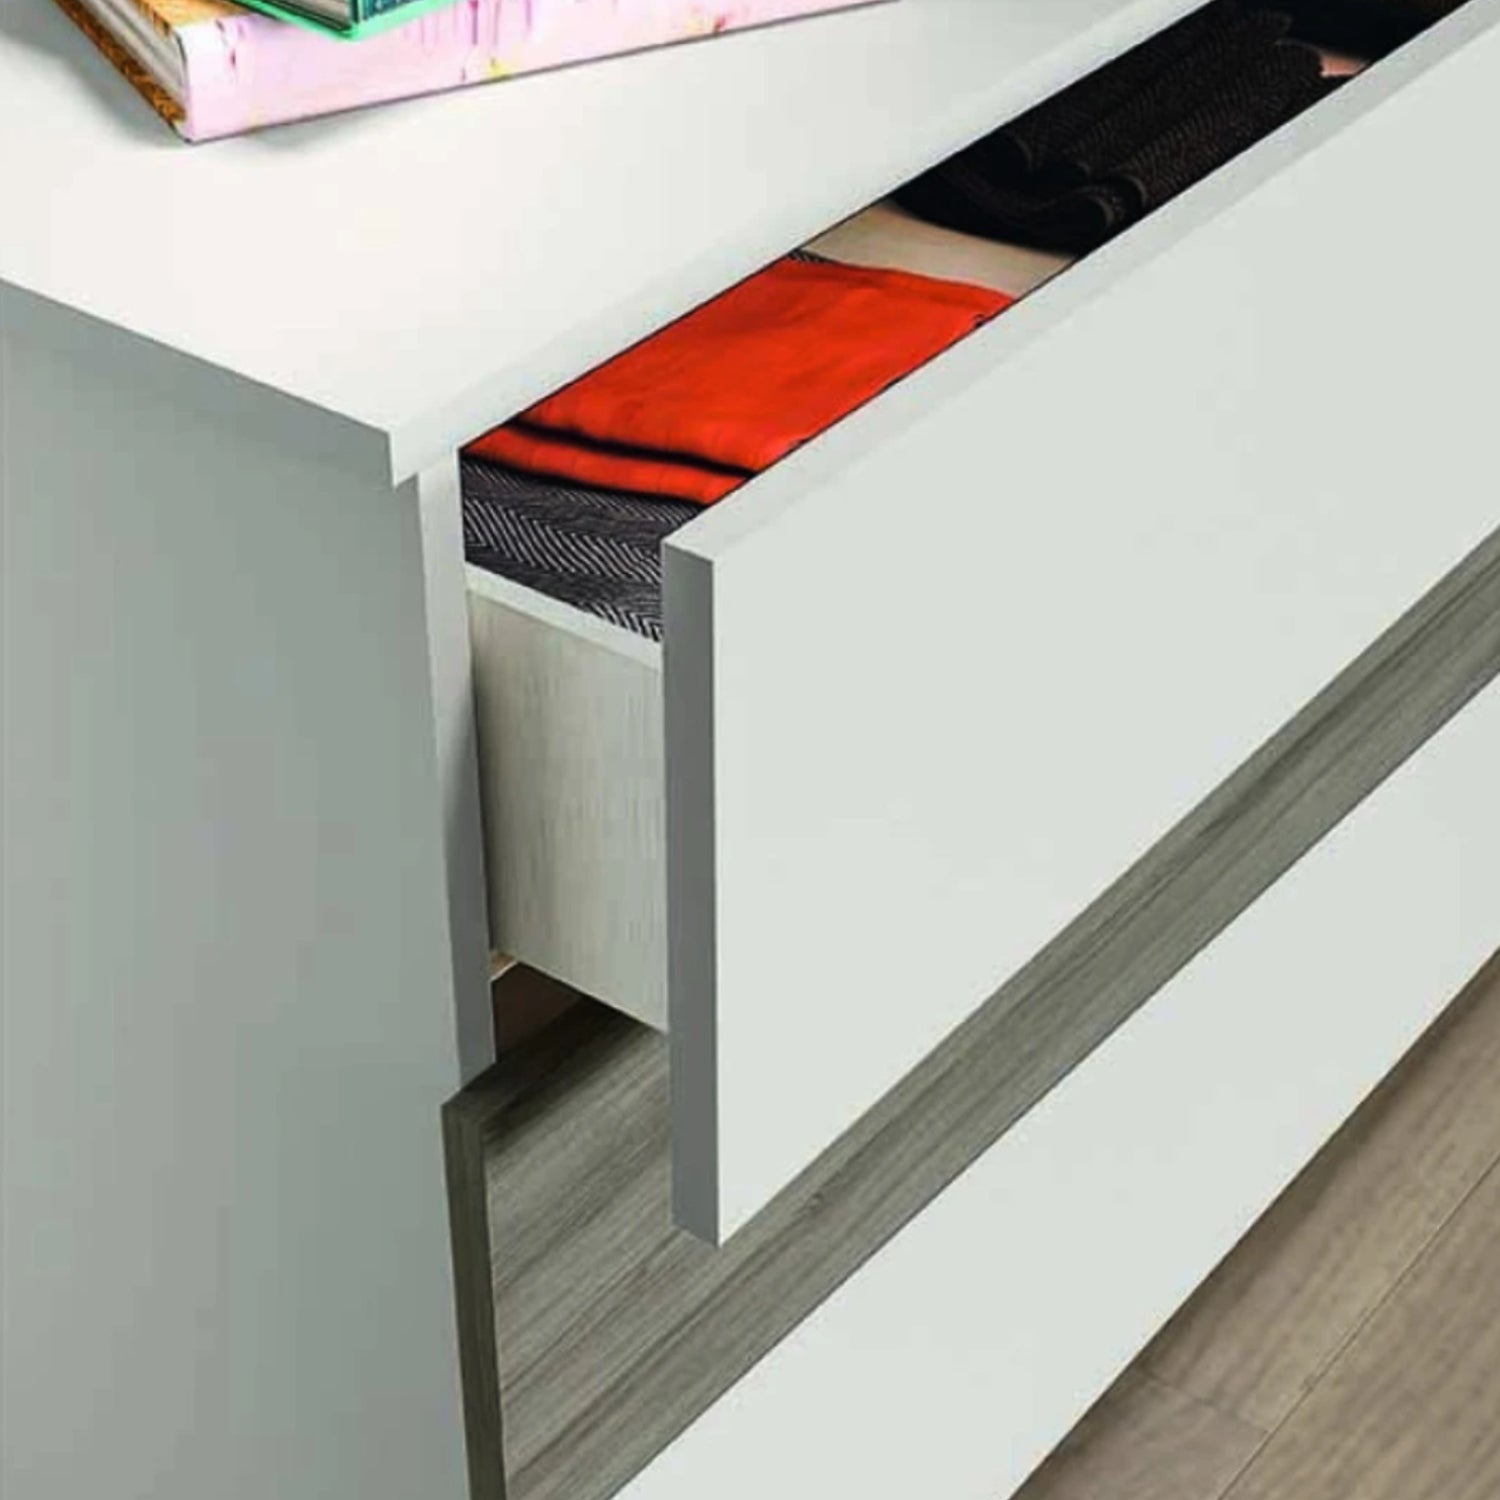 Ambra Collection Dresser 3 Drawers